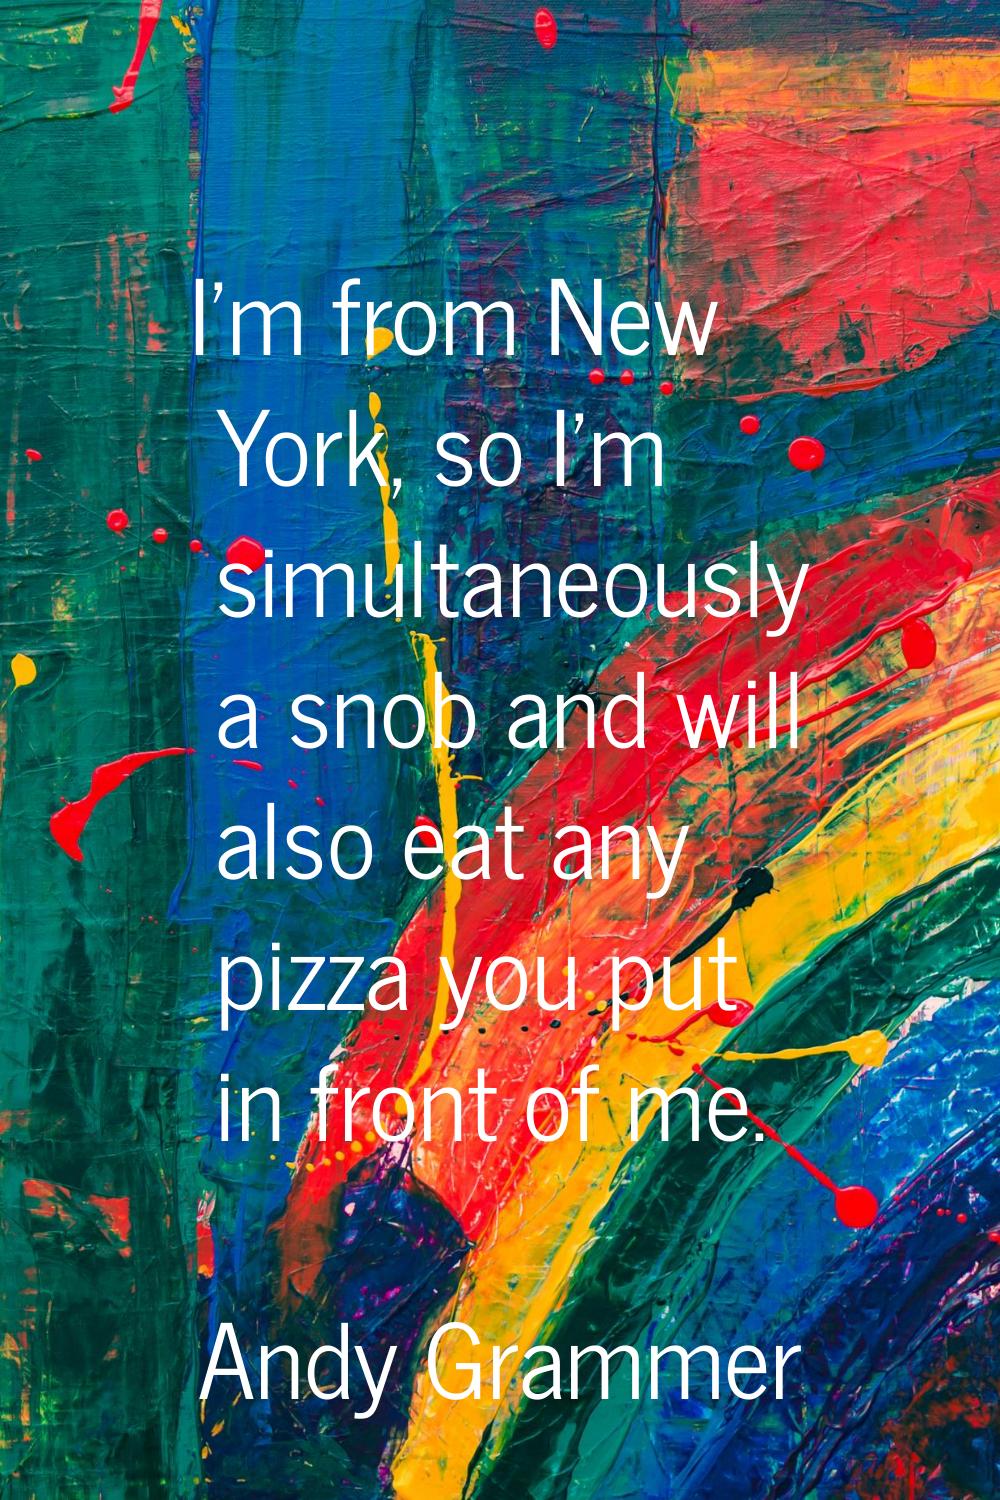 I'm from New York, so I'm simultaneously a snob and will also eat any pizza you put in front of me.